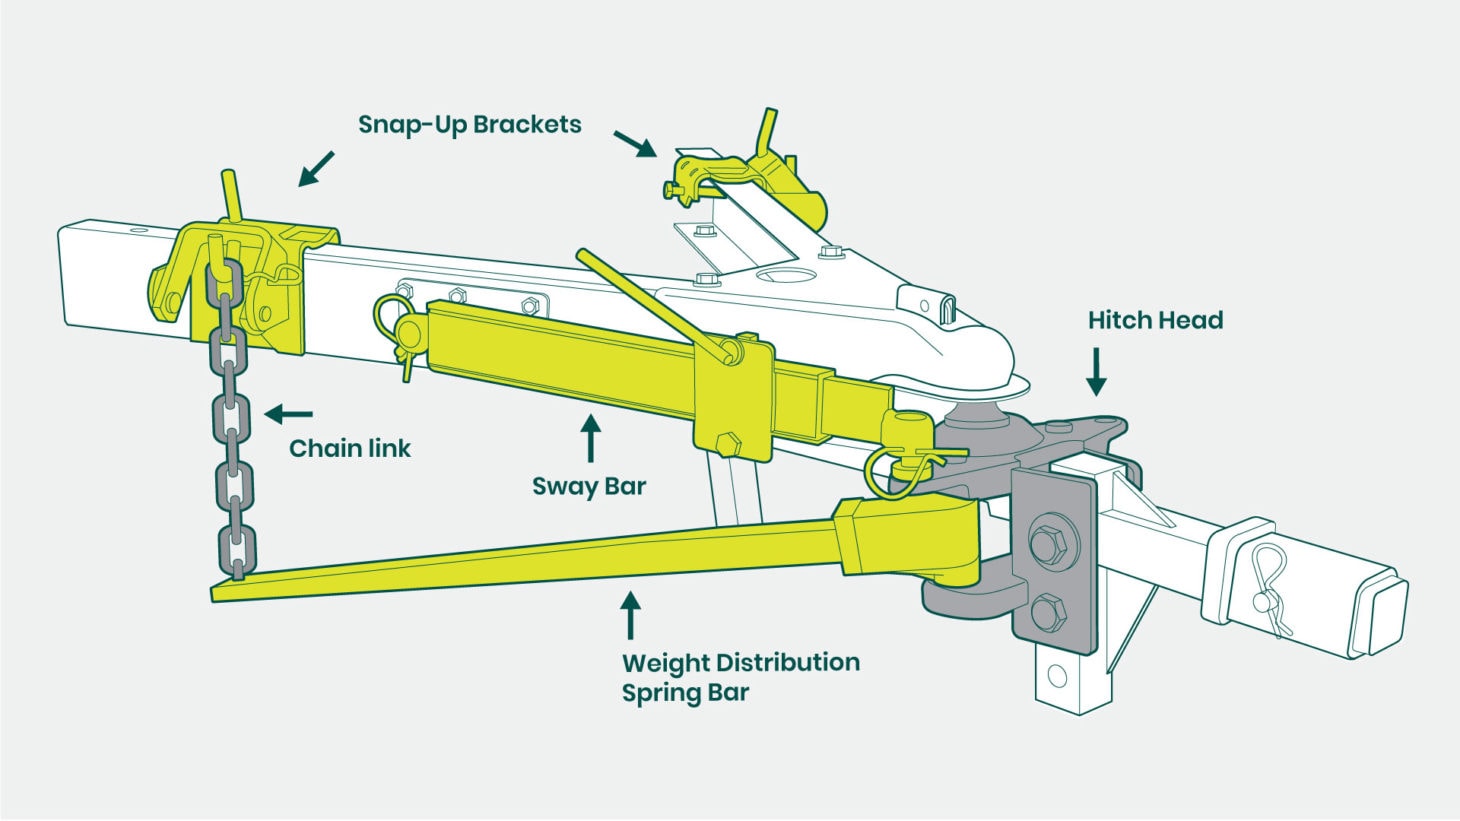 Illustration of weight distribution and sway bar connected to a hitch head